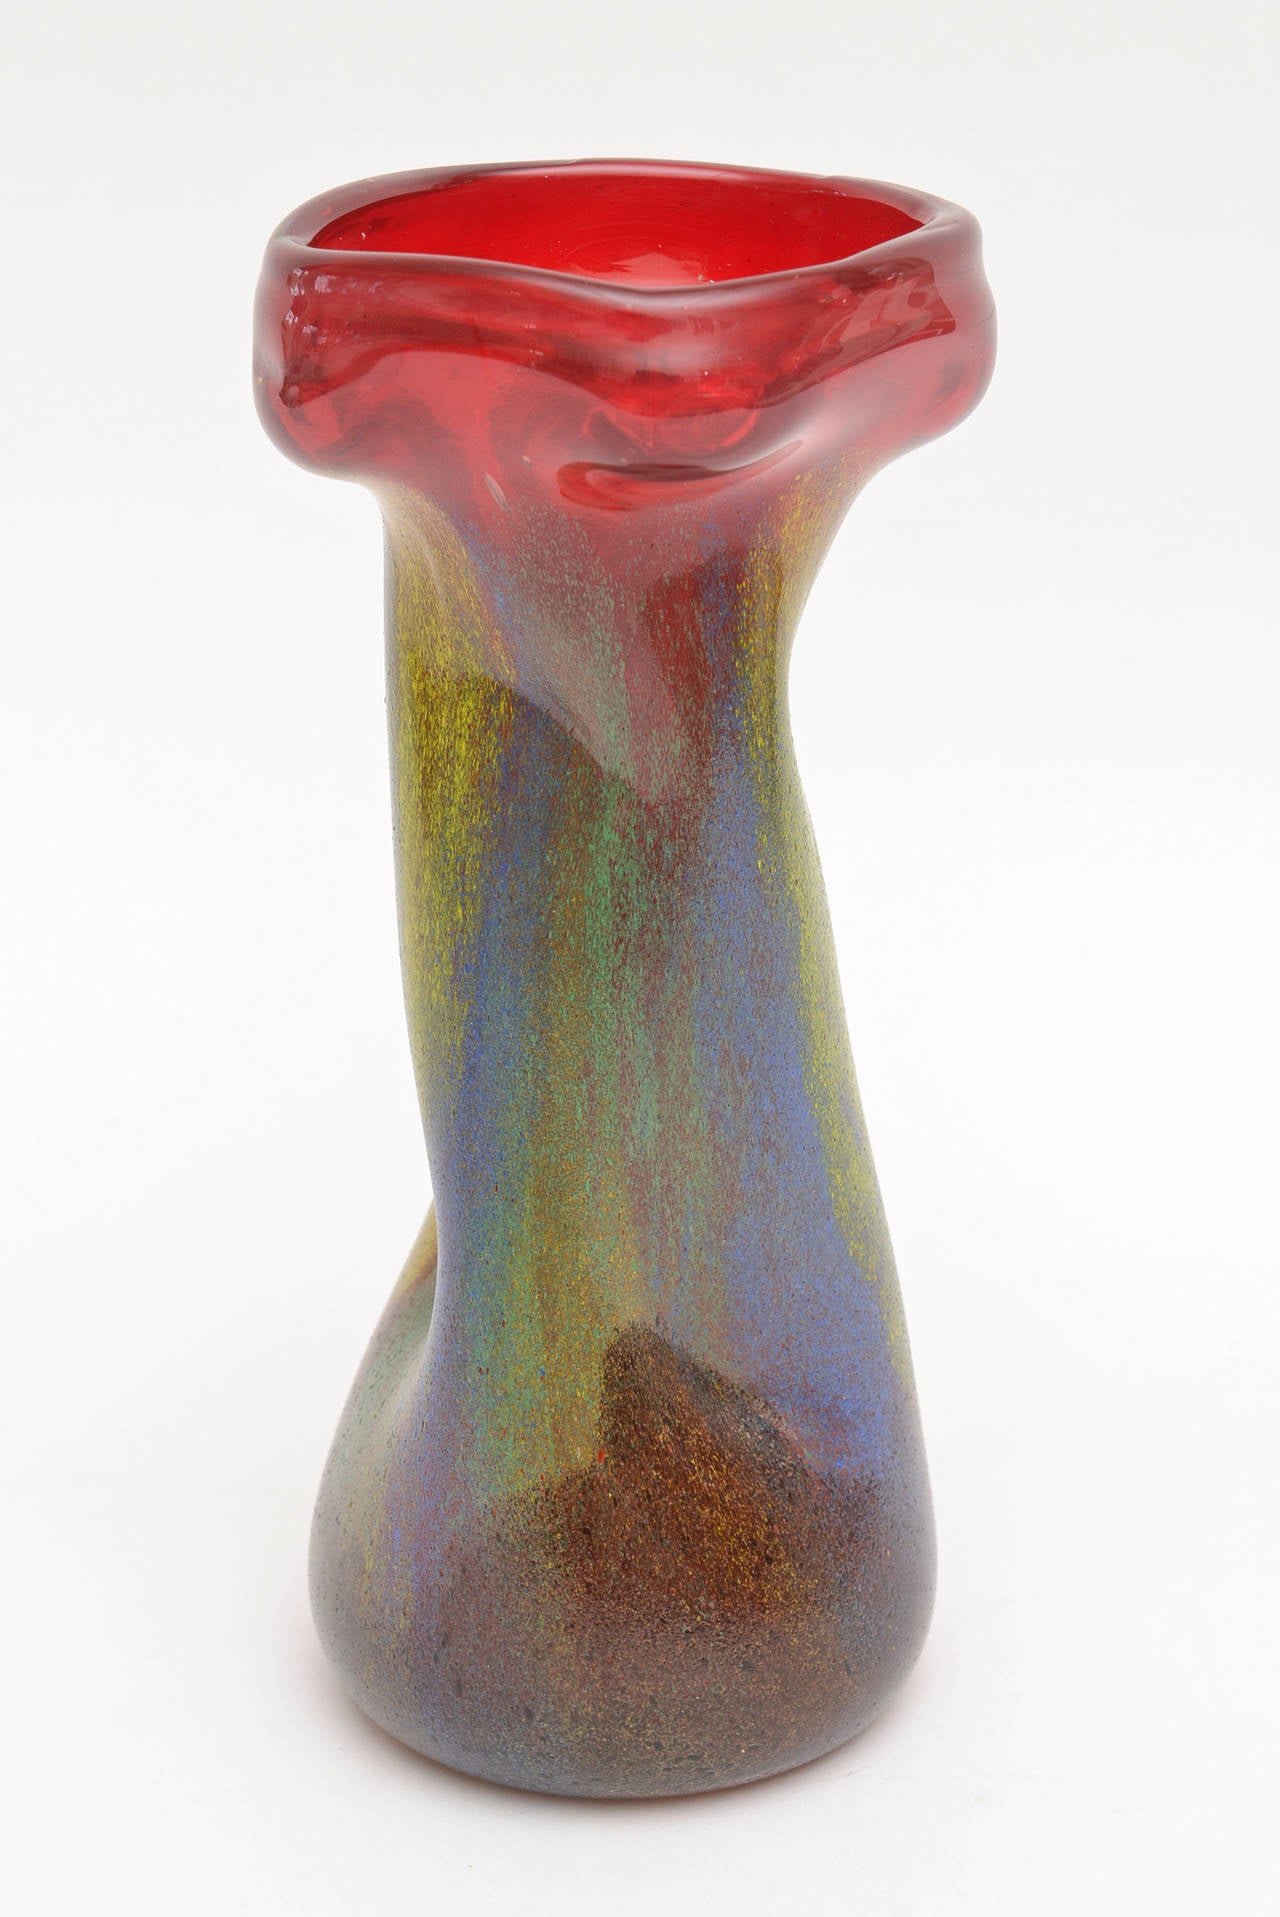 The wonderful painterly quality of this rare and book credited vintage Italian Dino Martens vase has the brilliant red base background. The crushed painterly glass overlay has texture. It is like an abstract painting. The sides are cinched. The rich